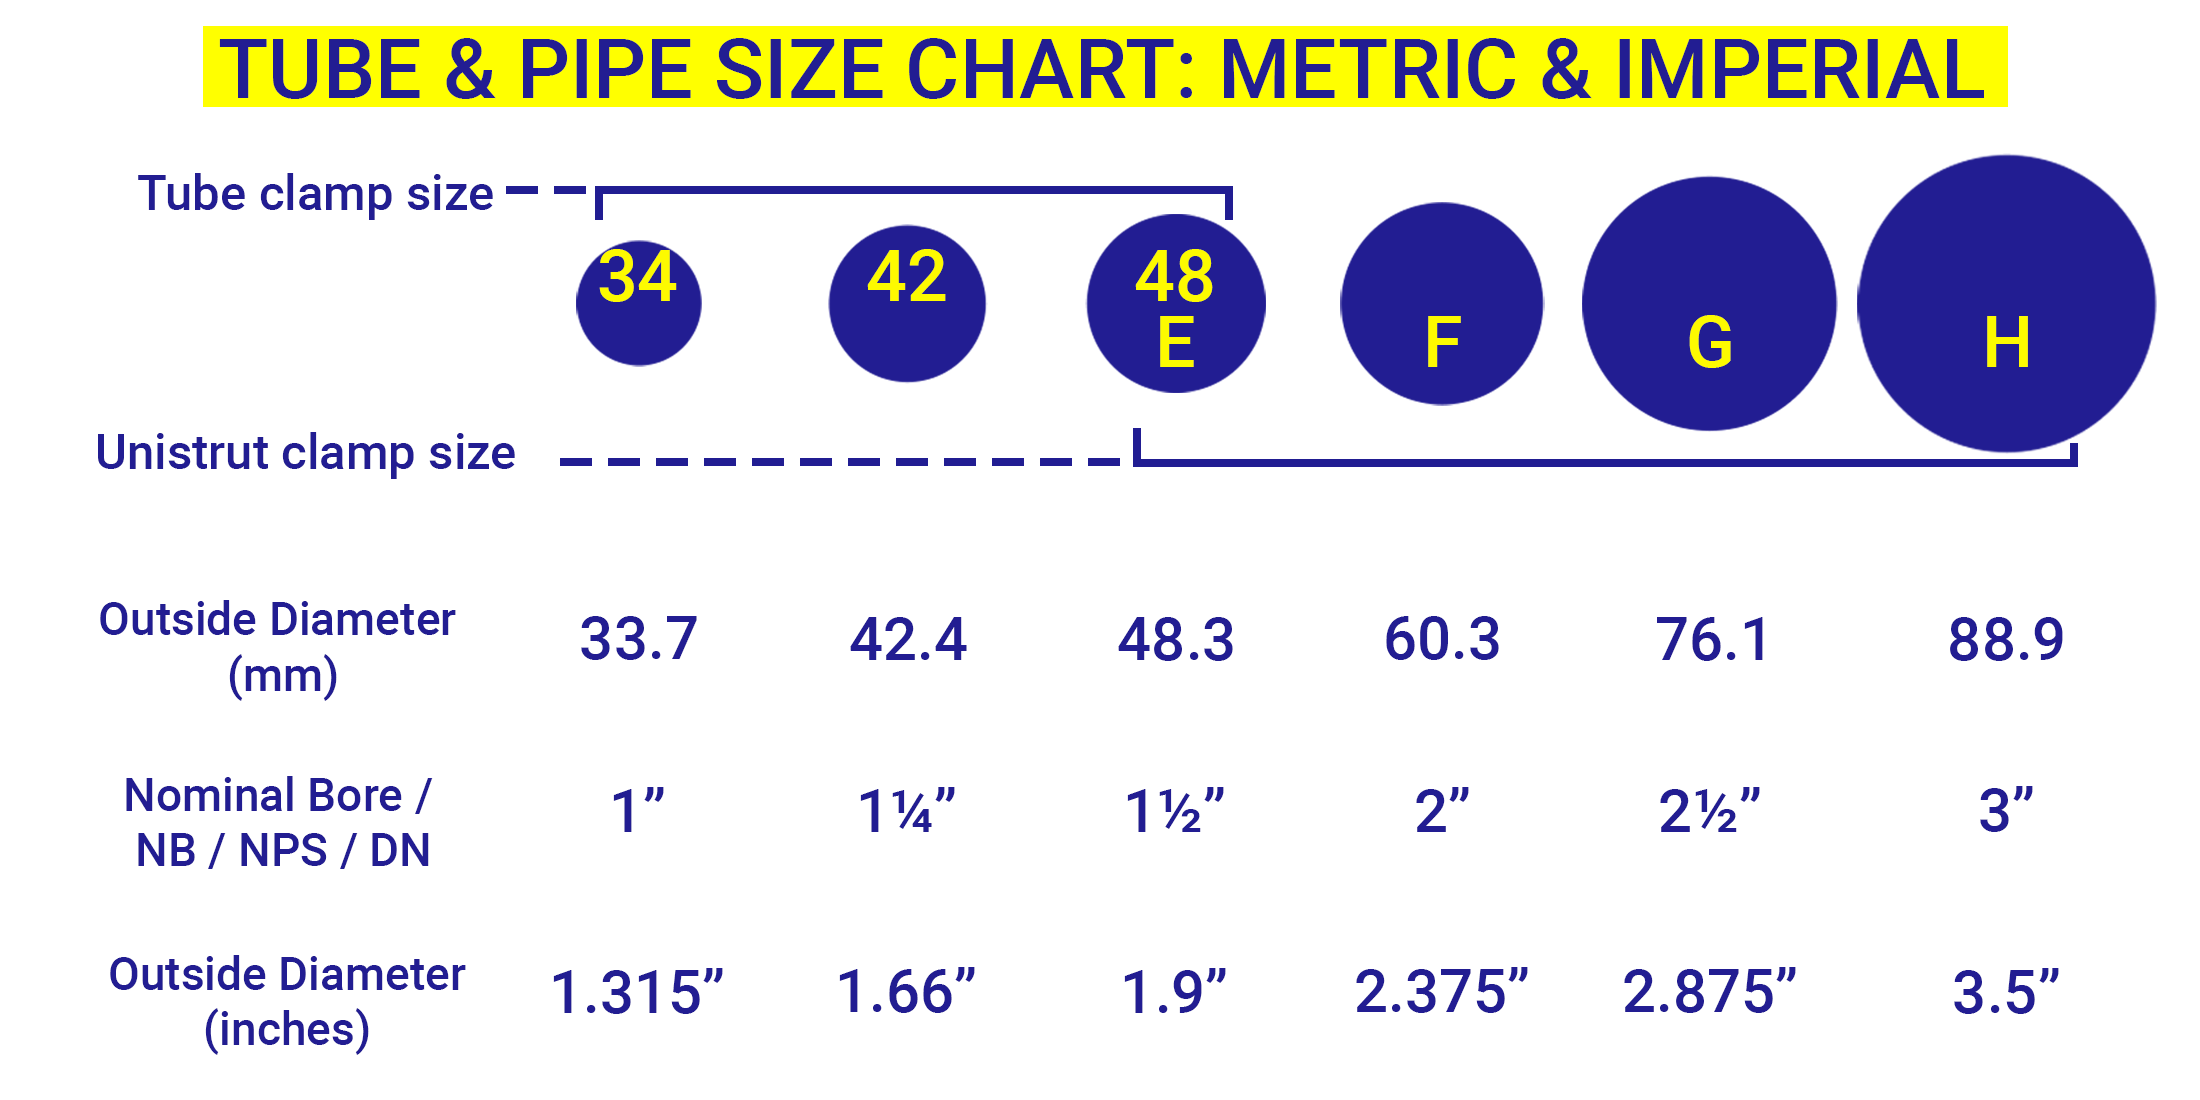 Tube and pipe size chart metric and imperial